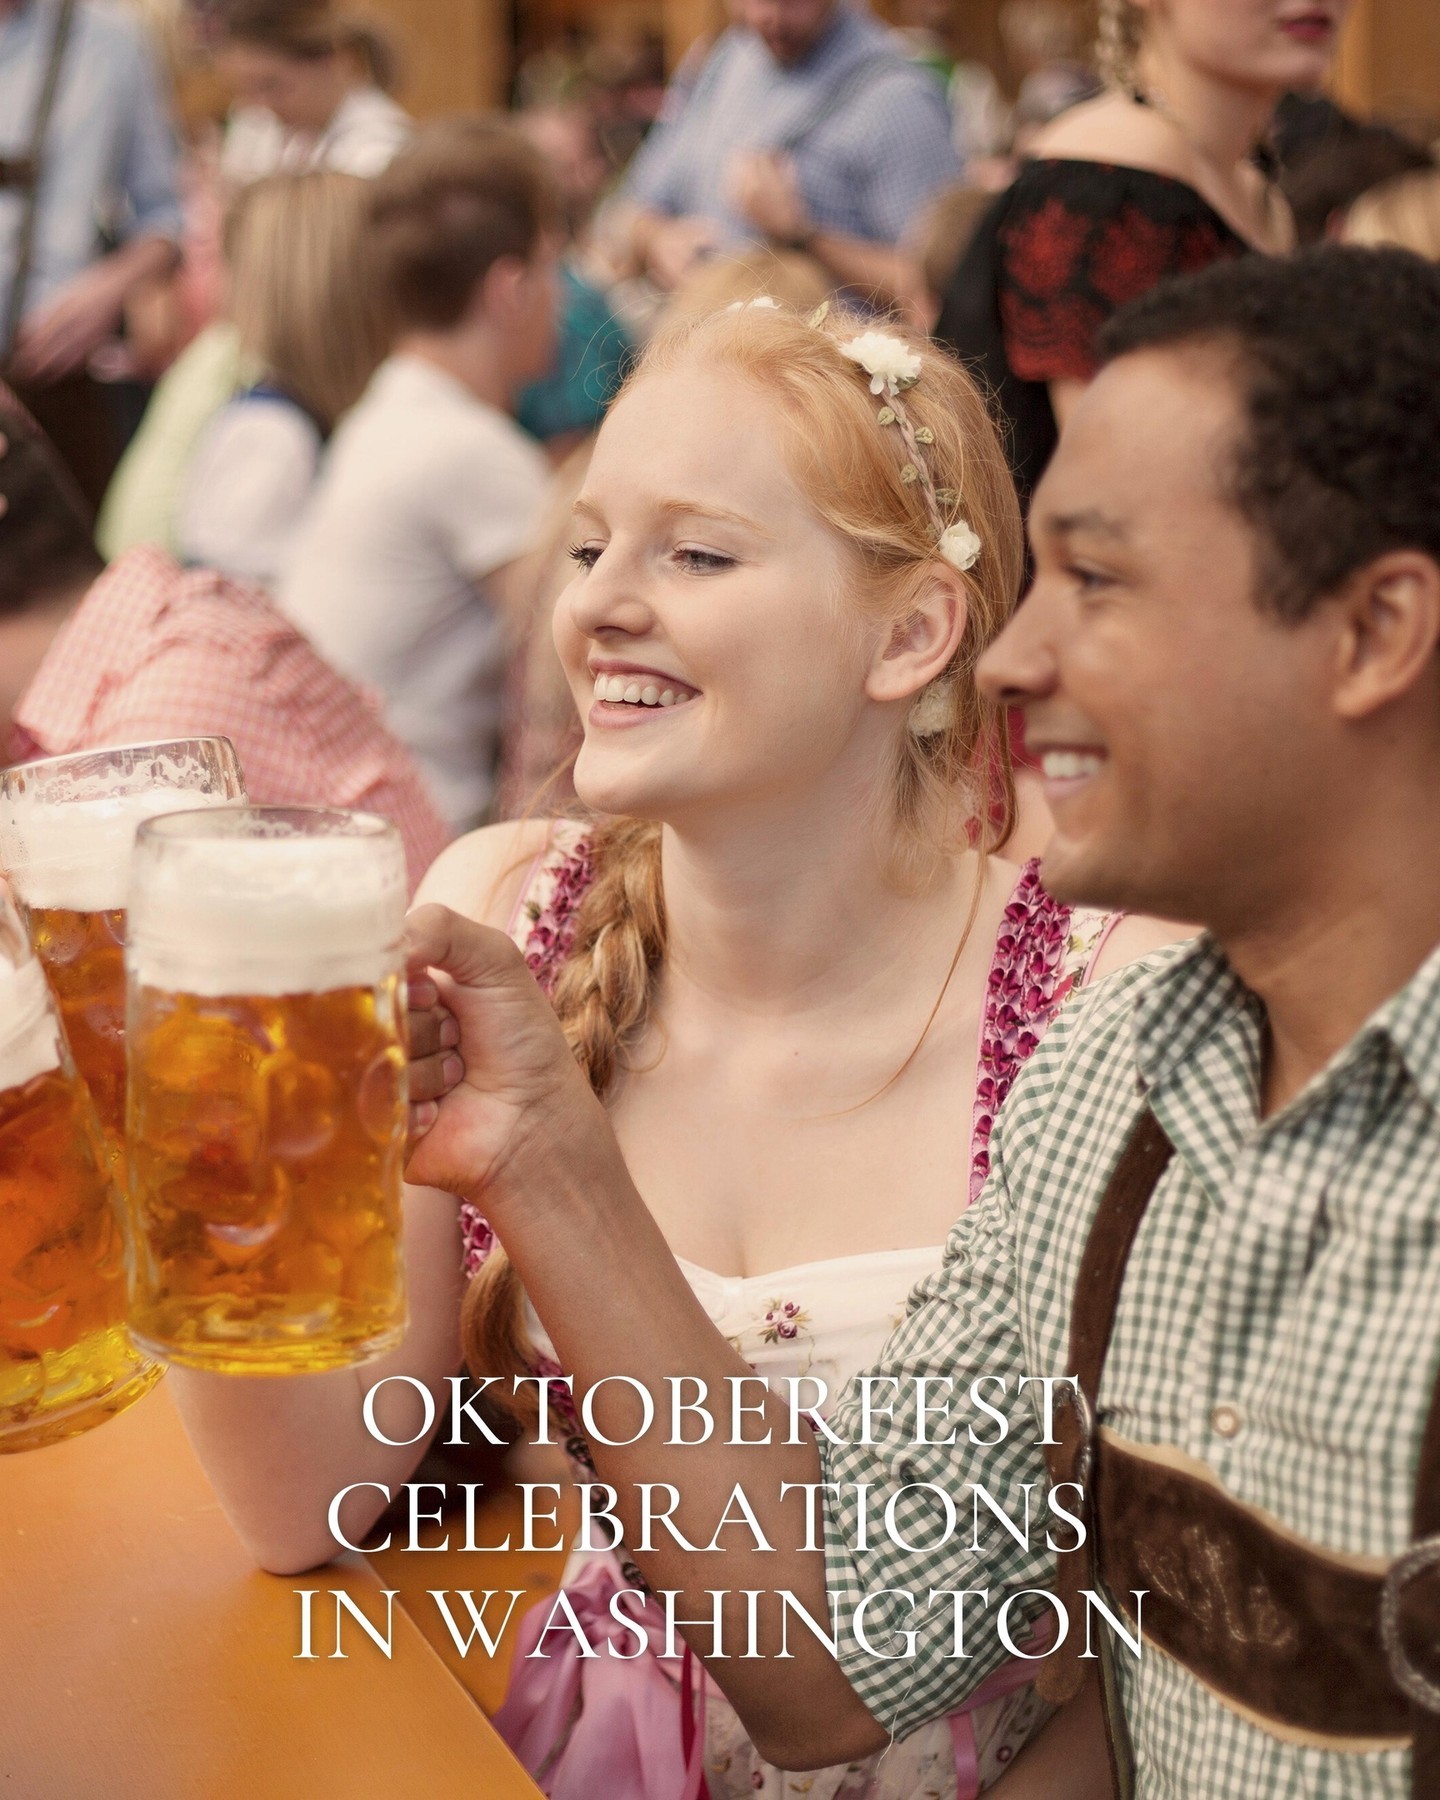 It's that time of the year! 🍻 Though you might not be able to venture to Germany for Oktoberfest this year, you can still make the most of the annual fall celebration with a month chock full of beer festivals, brats and more family-friendly fun in Washington. Learn where you can celebrate using the link in our bio!